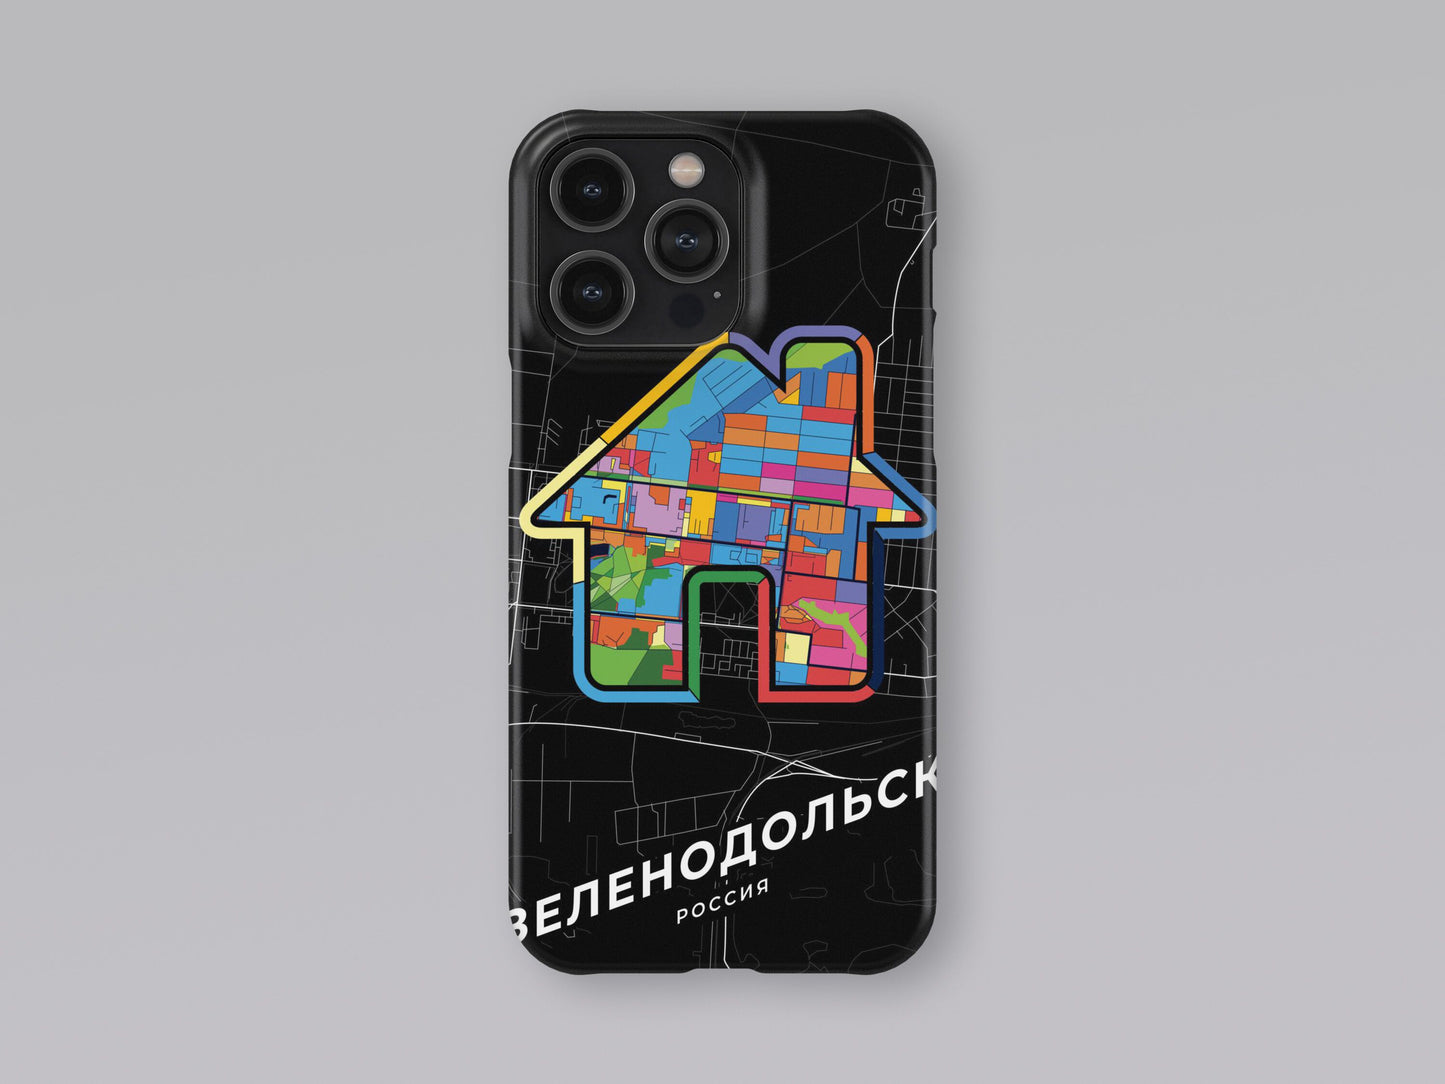 Zelenodolsk Russia slim phone case with colorful icon 3